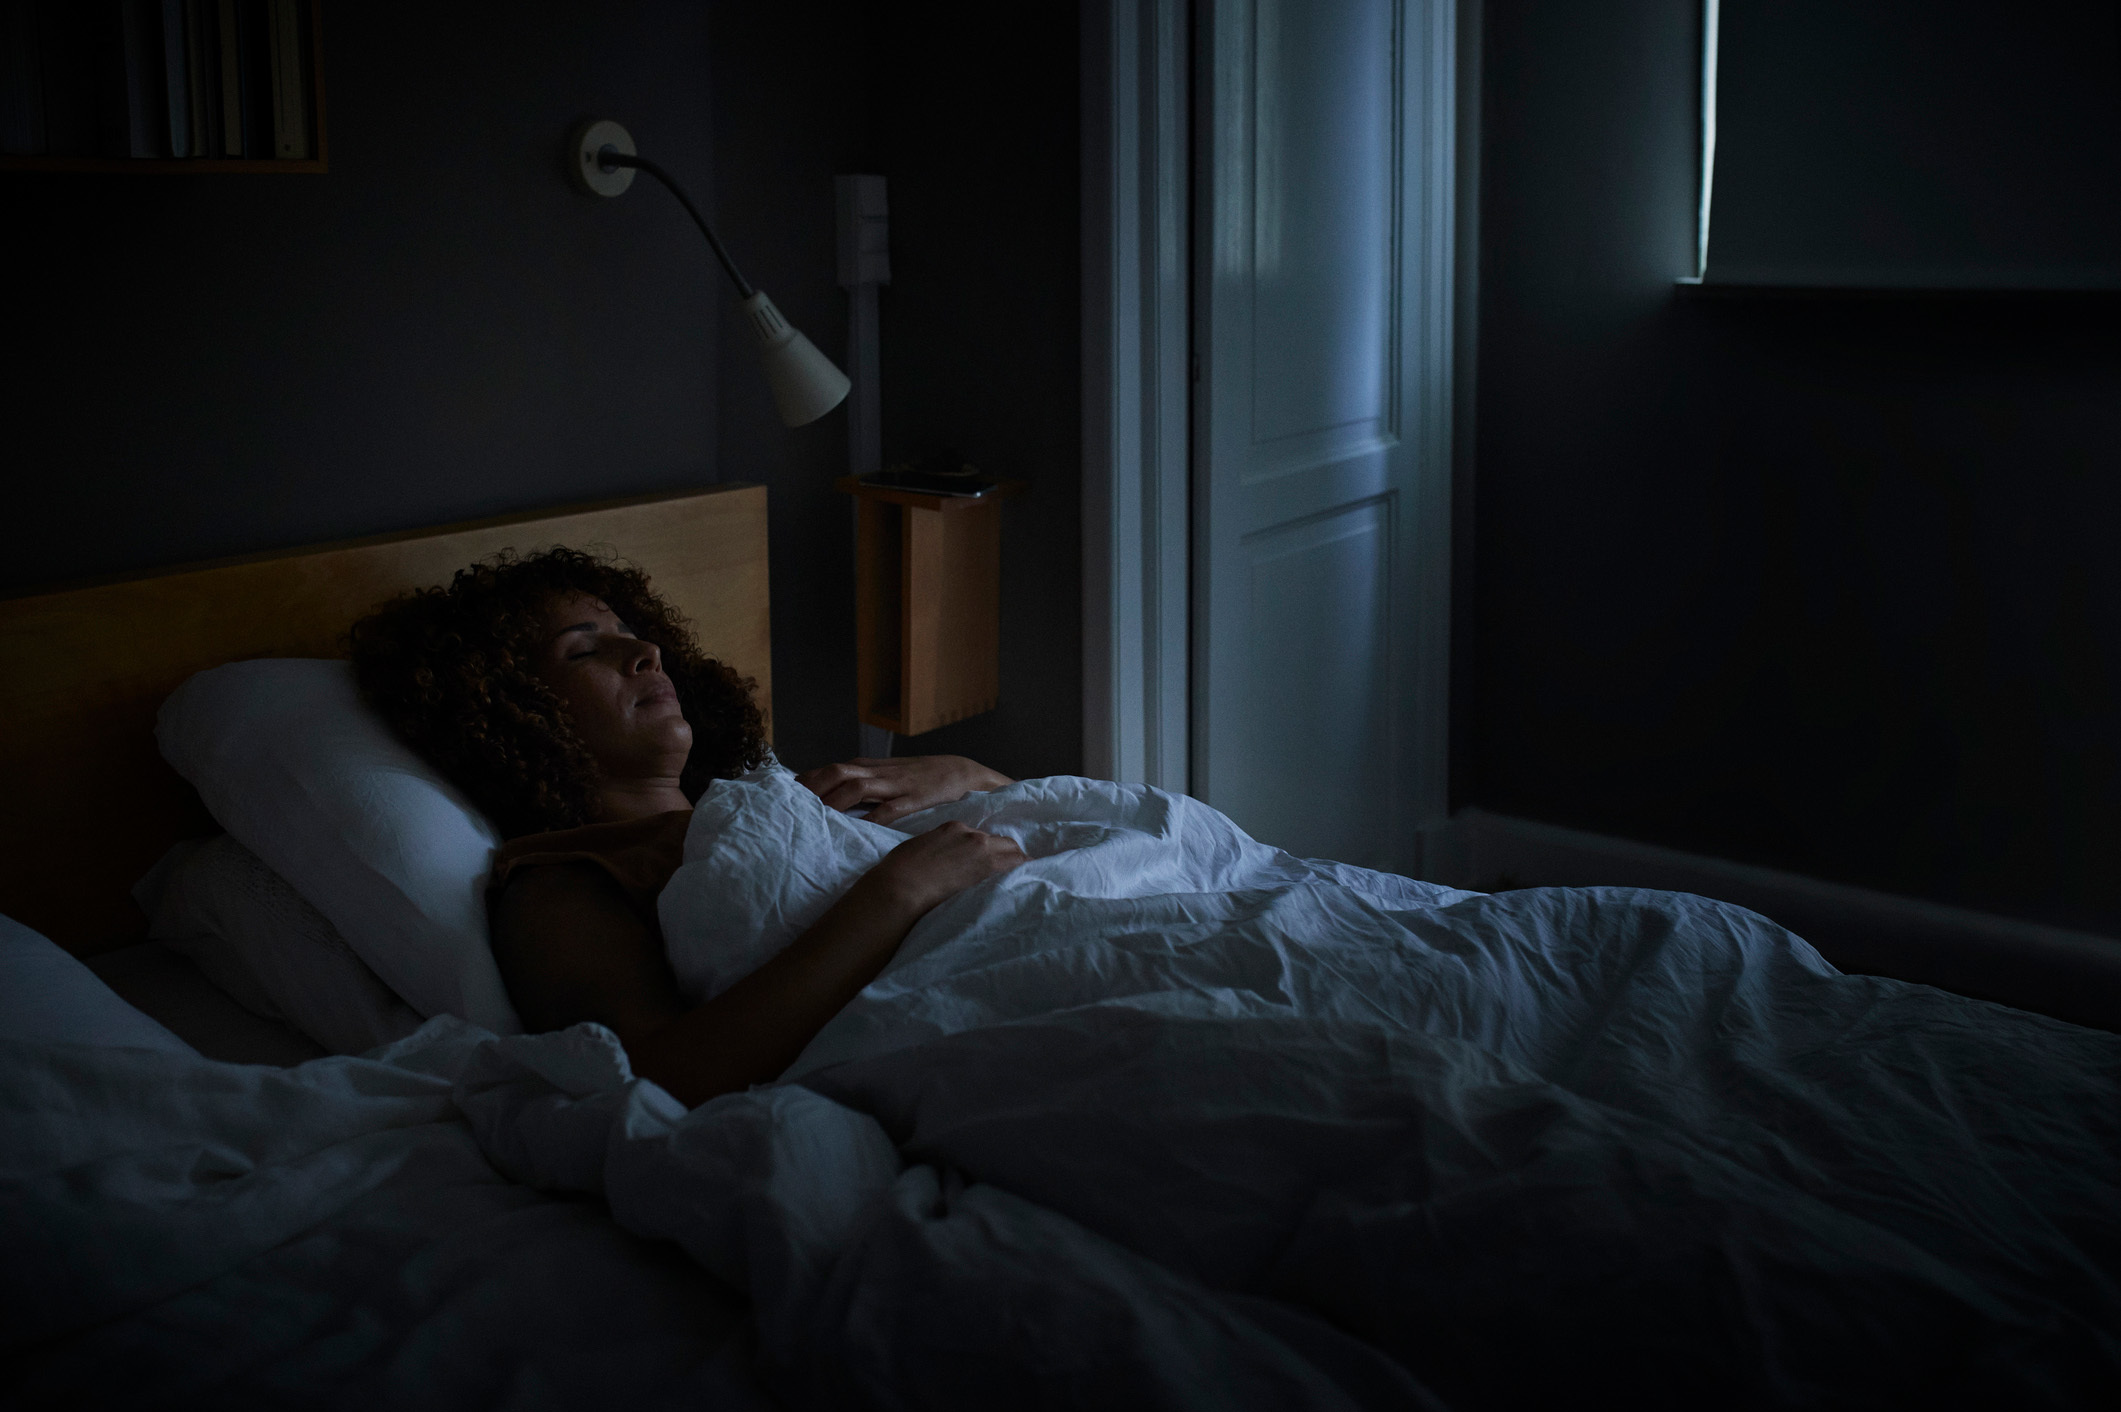 Just One Night S Sleep With Artificial Light Streaming Into Your Bedroom — From A Tv